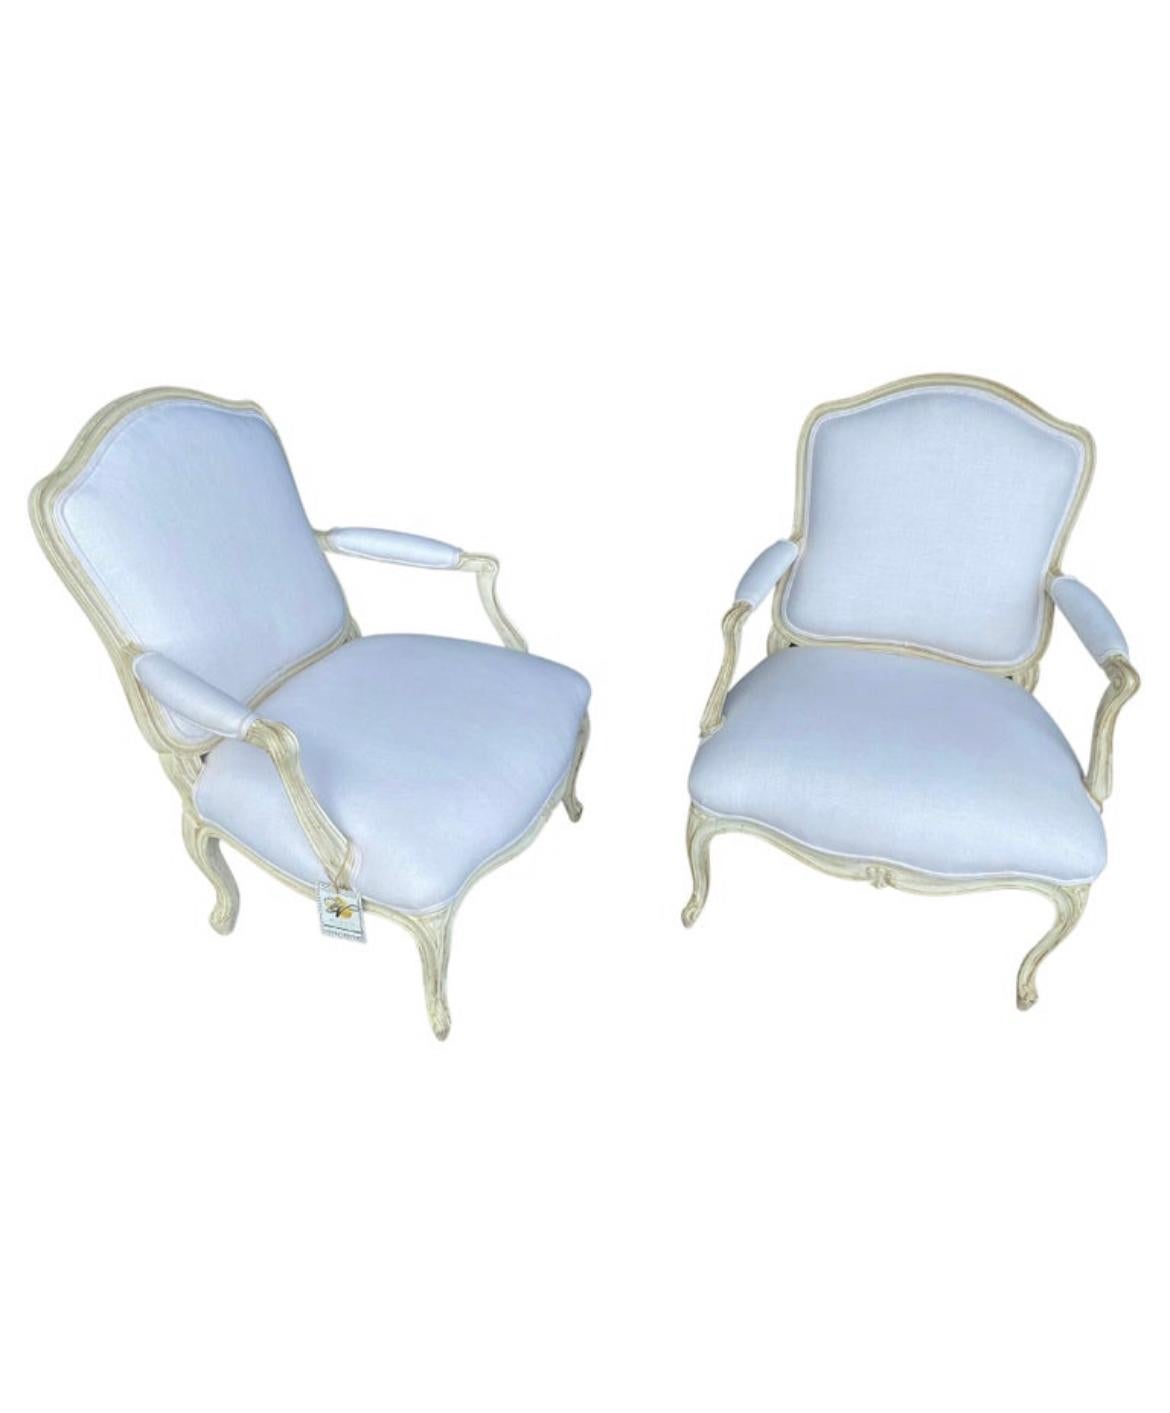 A beautiful pair of Louis XV style of chairs reupholstered in a white linen fabric. Perfect for any sitting room, at the foot of a bed, hallway and more. The fabric has been professionally cleaned since we had these imported from Italy but there are